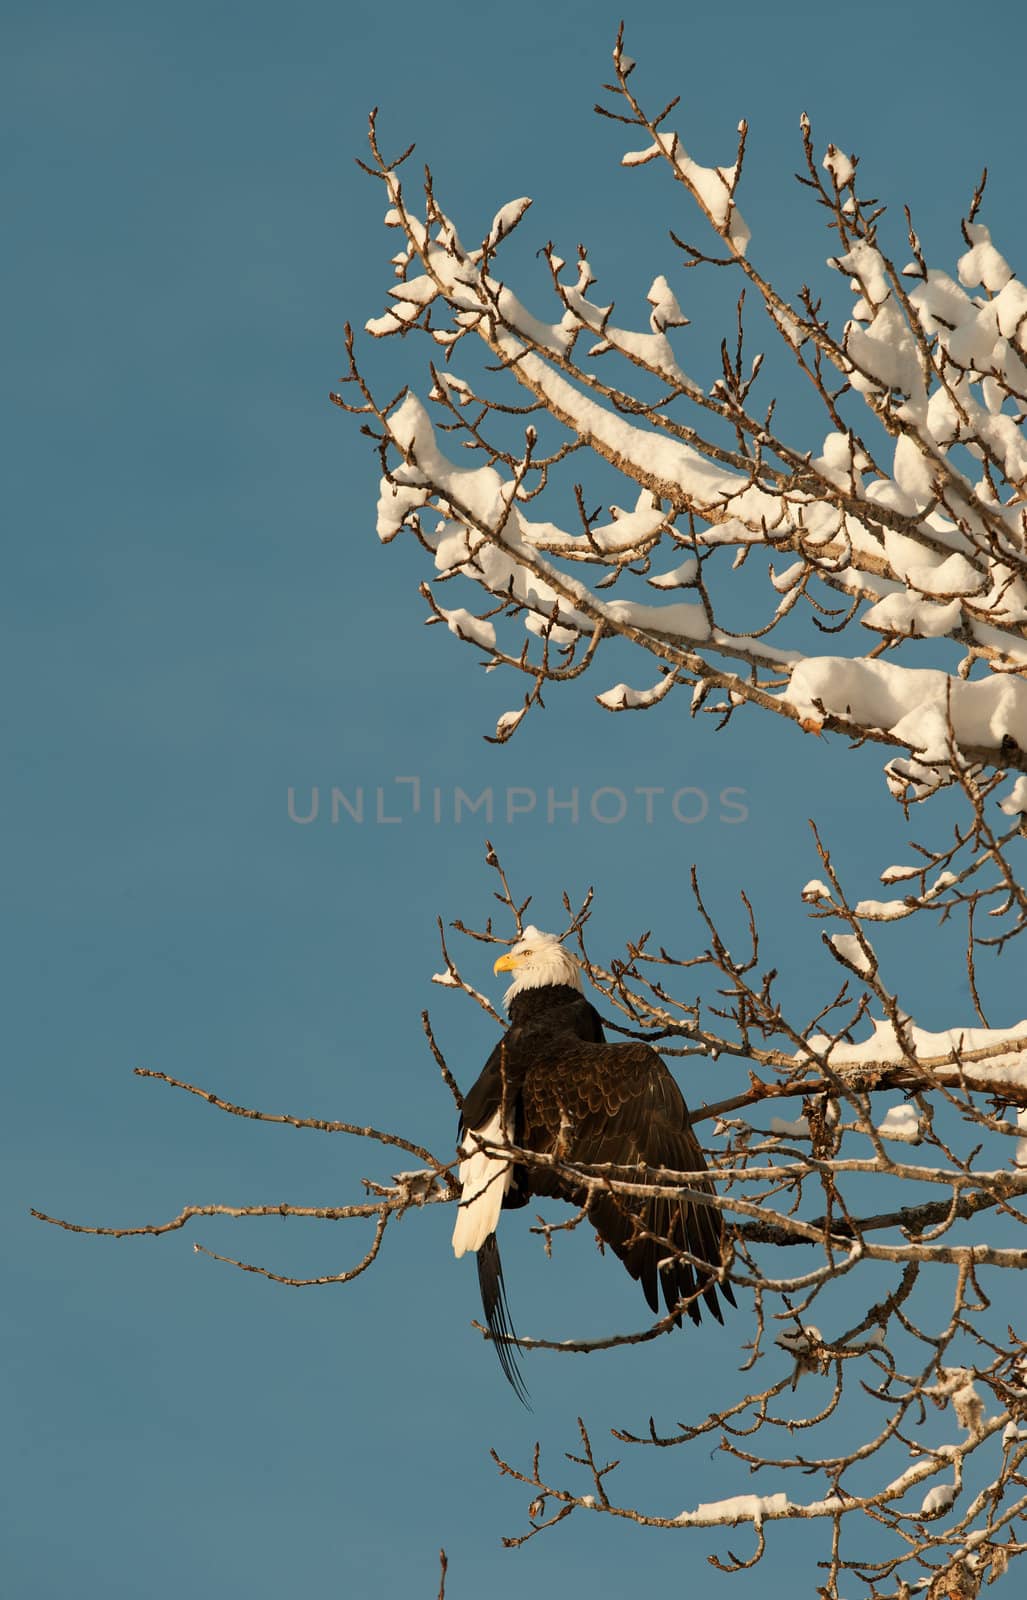 Bald eagle perched on tree by SURZ